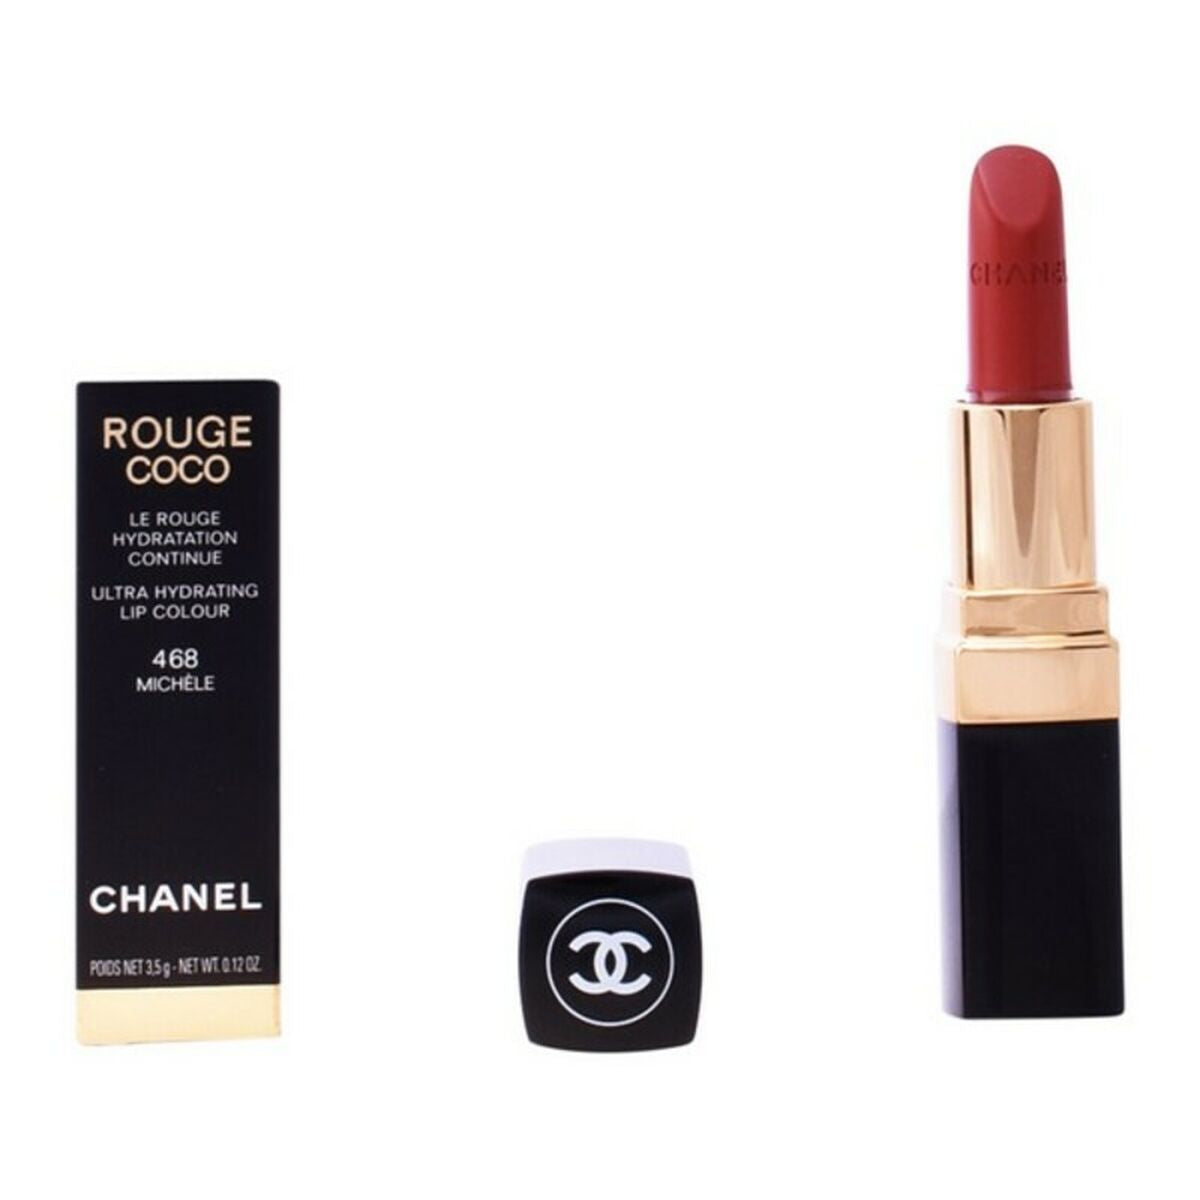 Chanel Freshness (120) Rouge Coco Bloom Lip Colour Review & Swatches